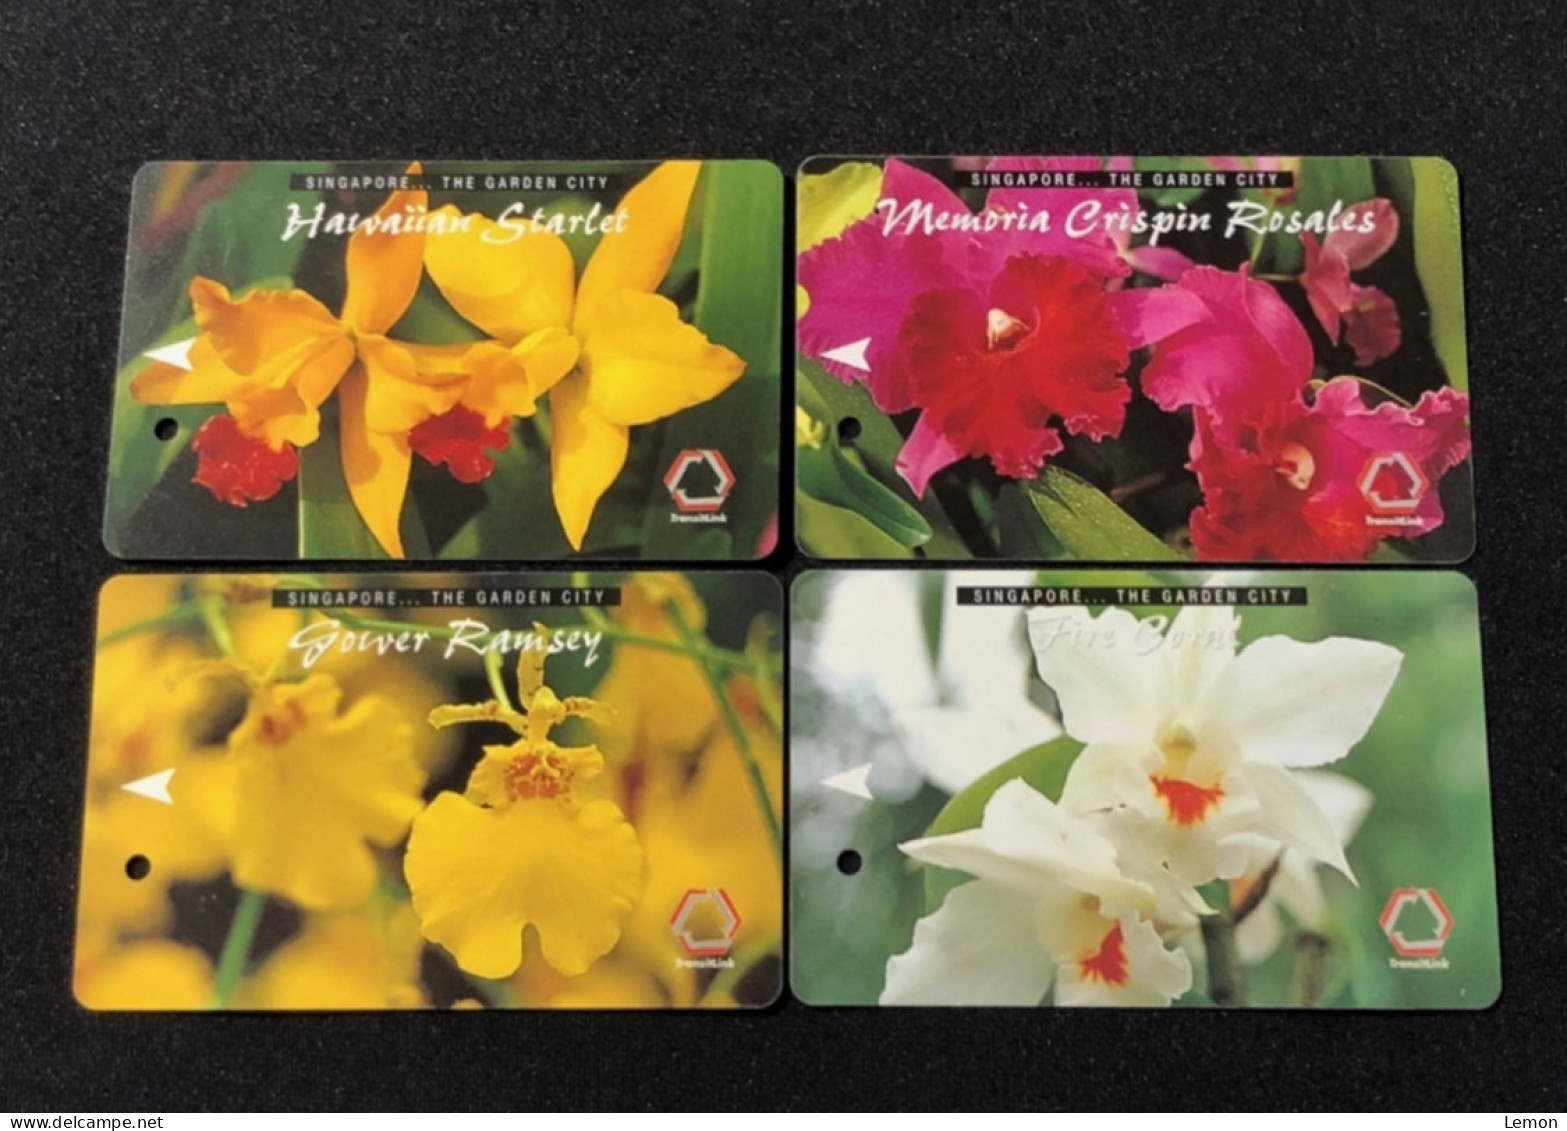 Singapore SMRT TransitLink Metro Train Subway Ticket Card, The Garden City Orchid Flower, Set Of 4 Used Cards - Singapore